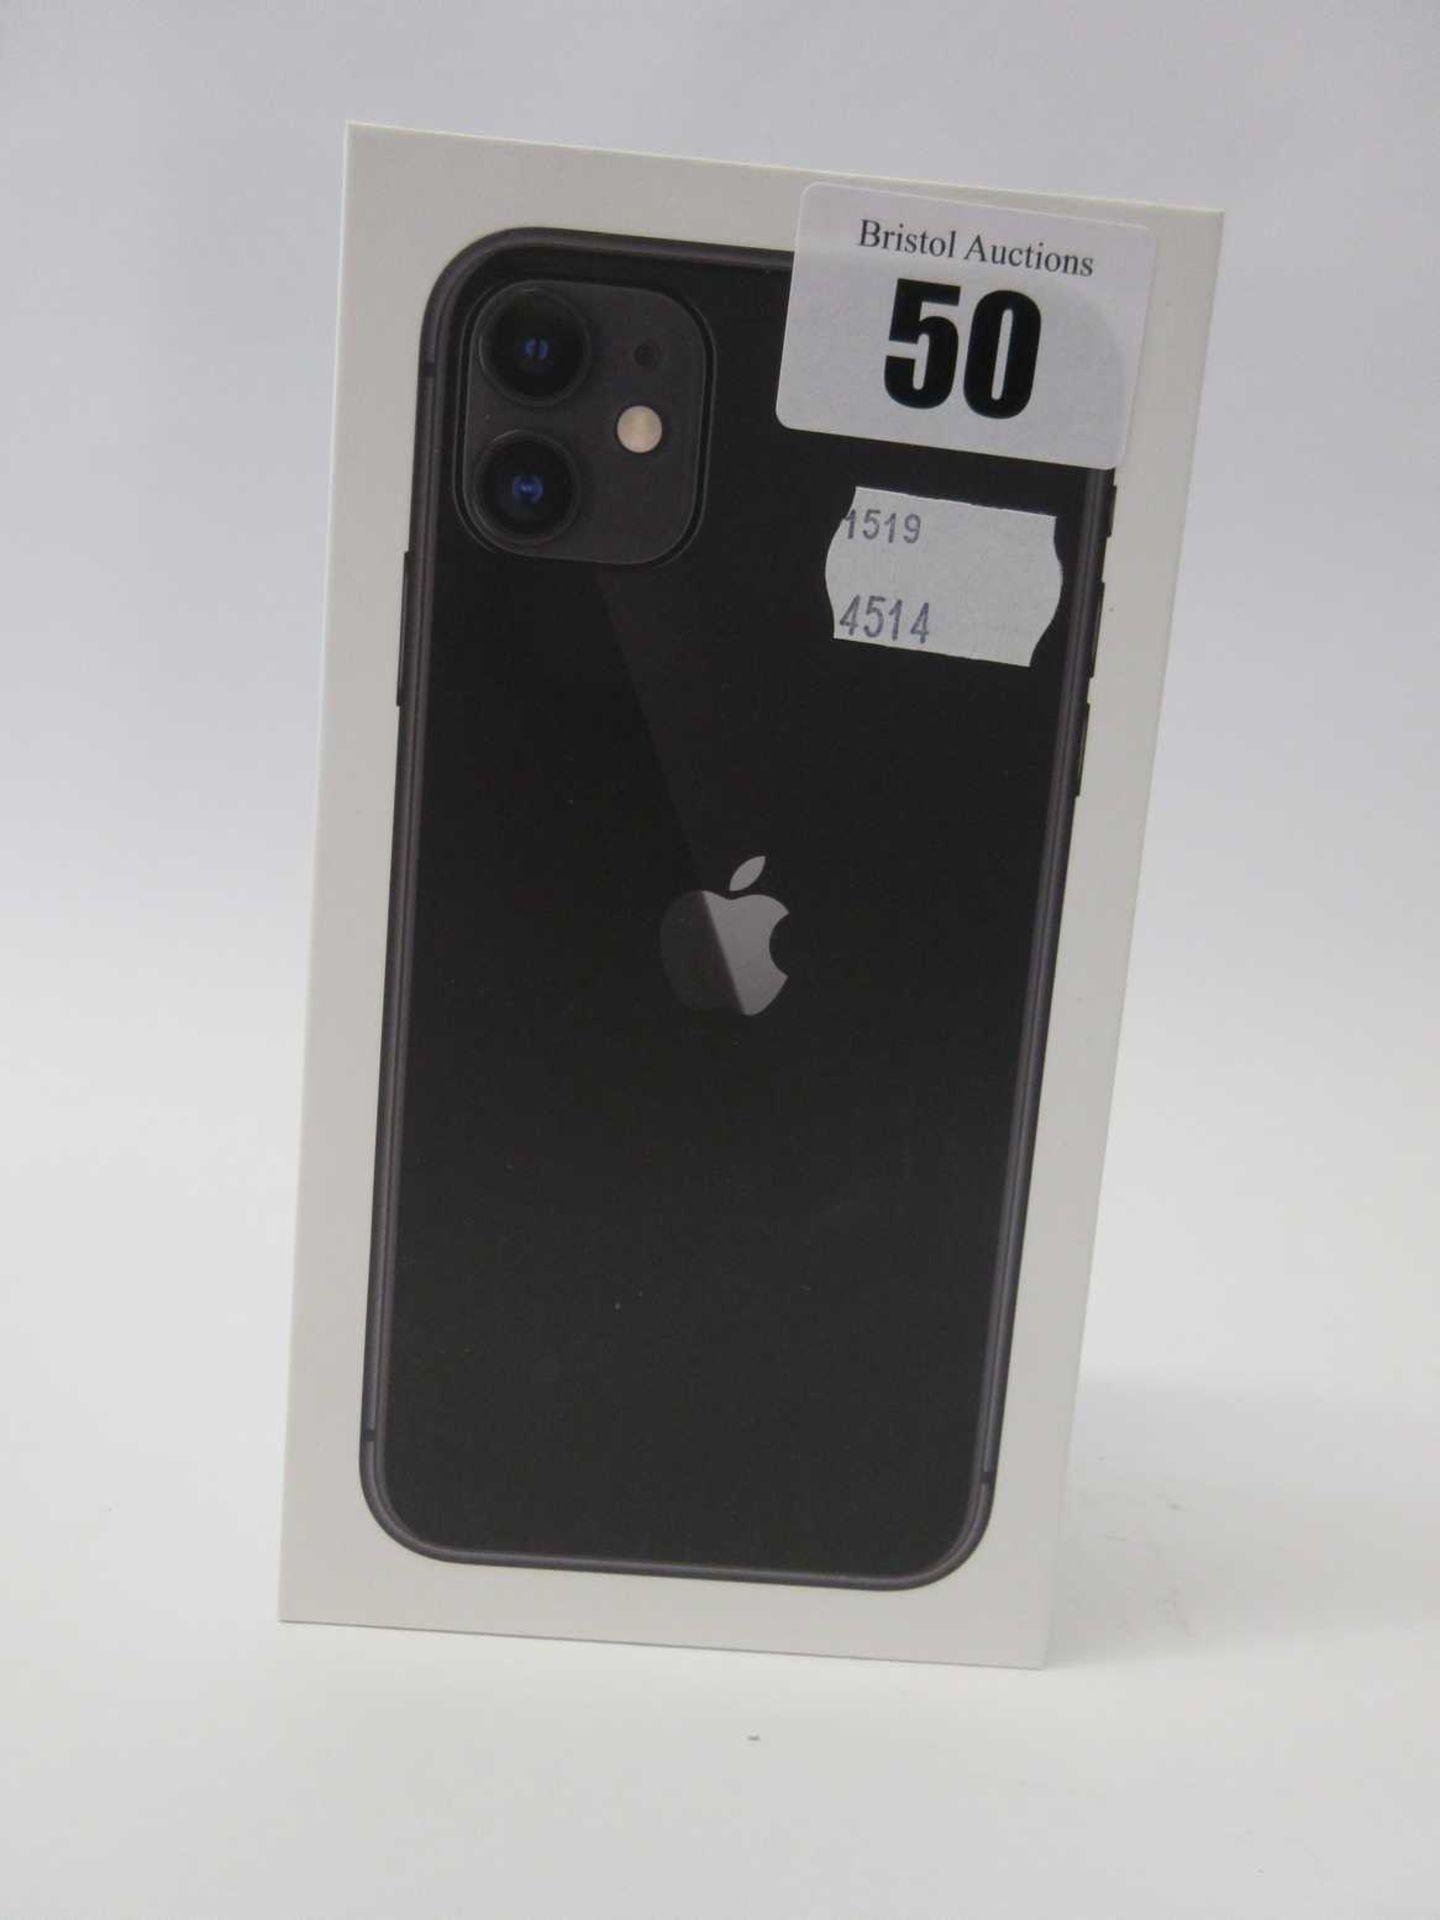 A brand new Apple iPhone 11 128GB in Black. A2221 Global model MWM02ZD/A. Carrier and SIM